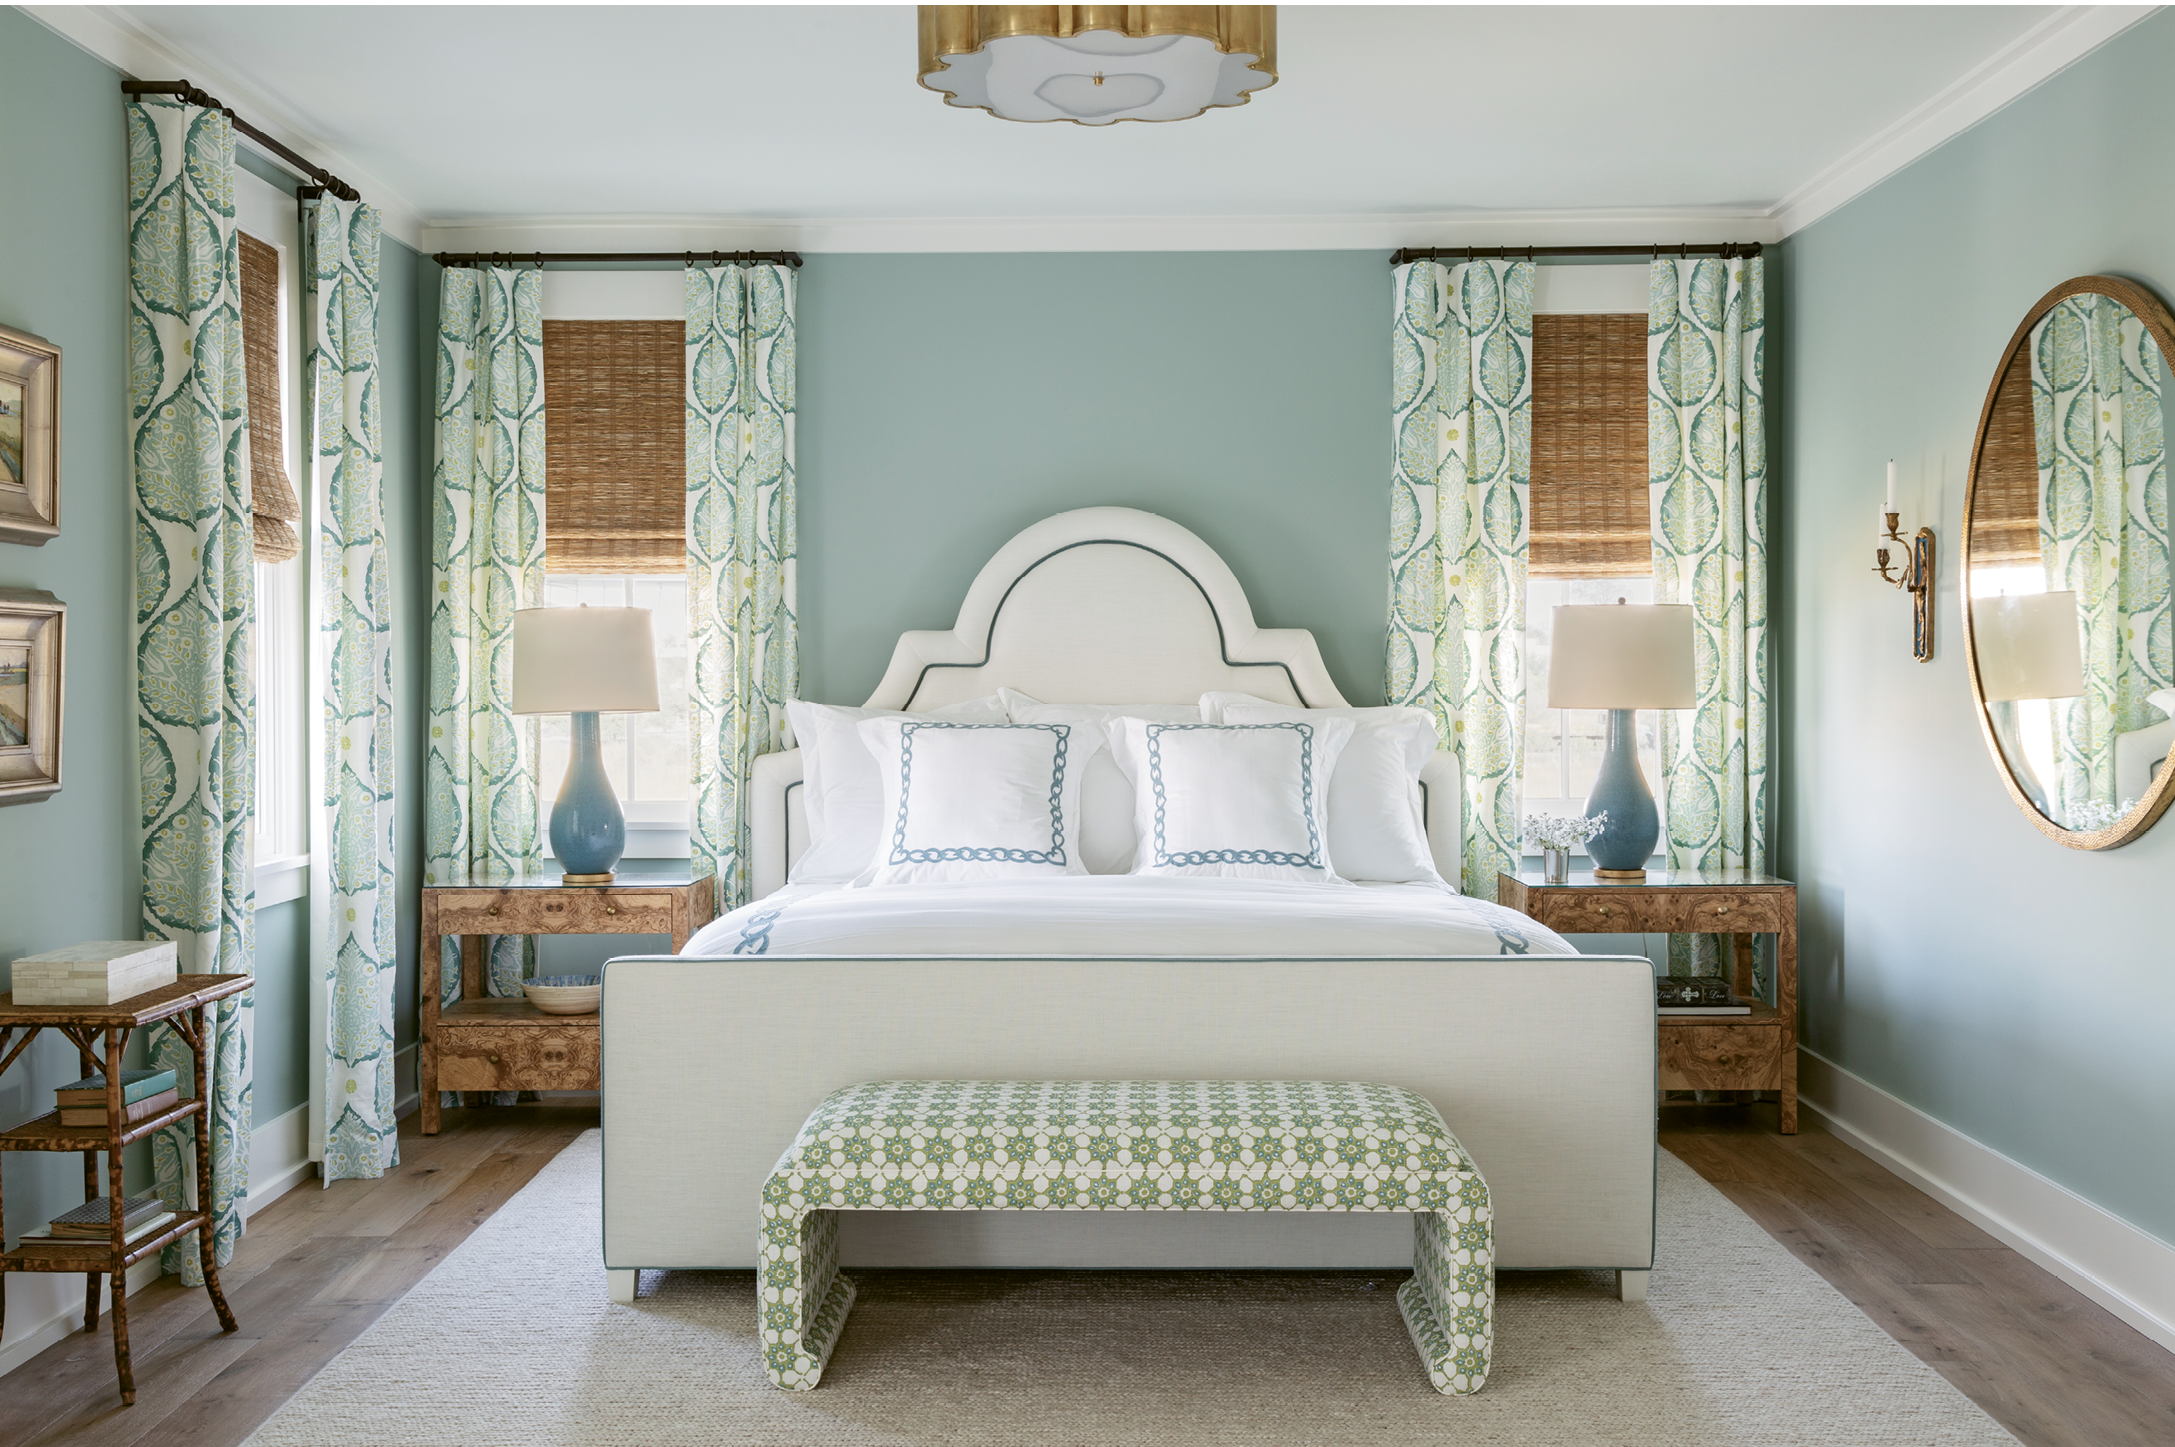 Beachy Boudoirs: The master bedroom is filled with colors inspired by the scenery outside.